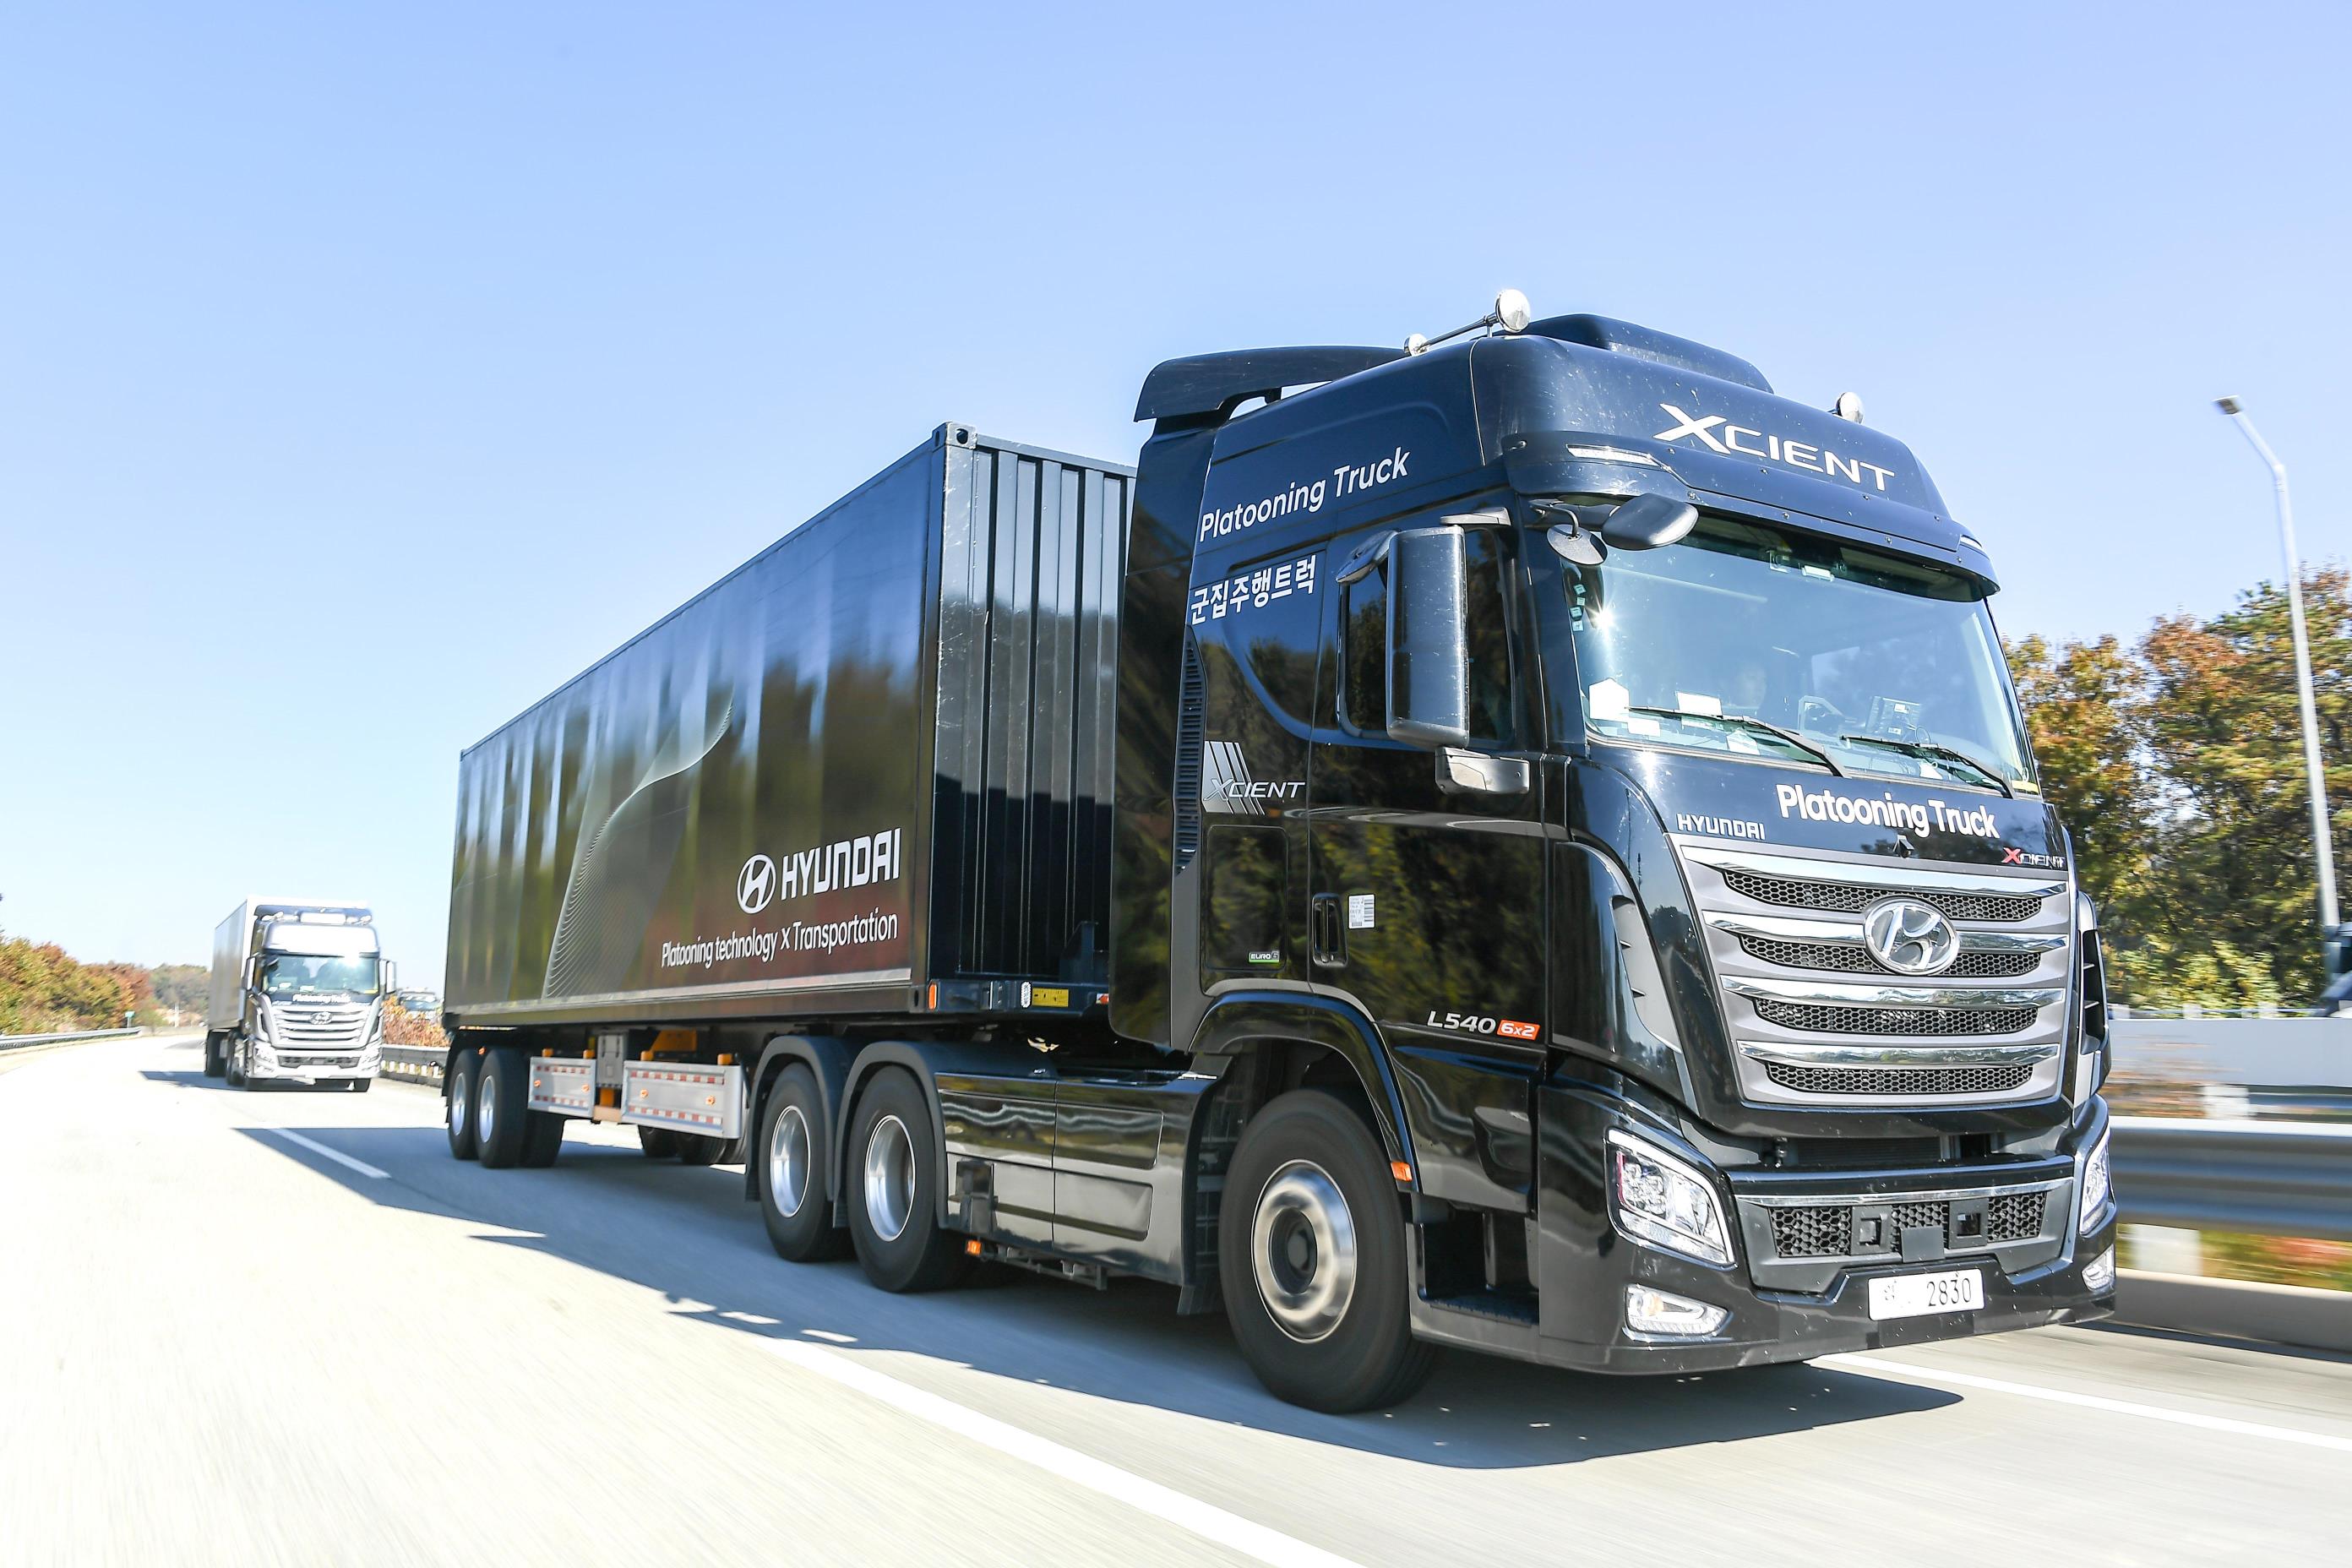 Platooning truck trial paving the way for an autonomous future